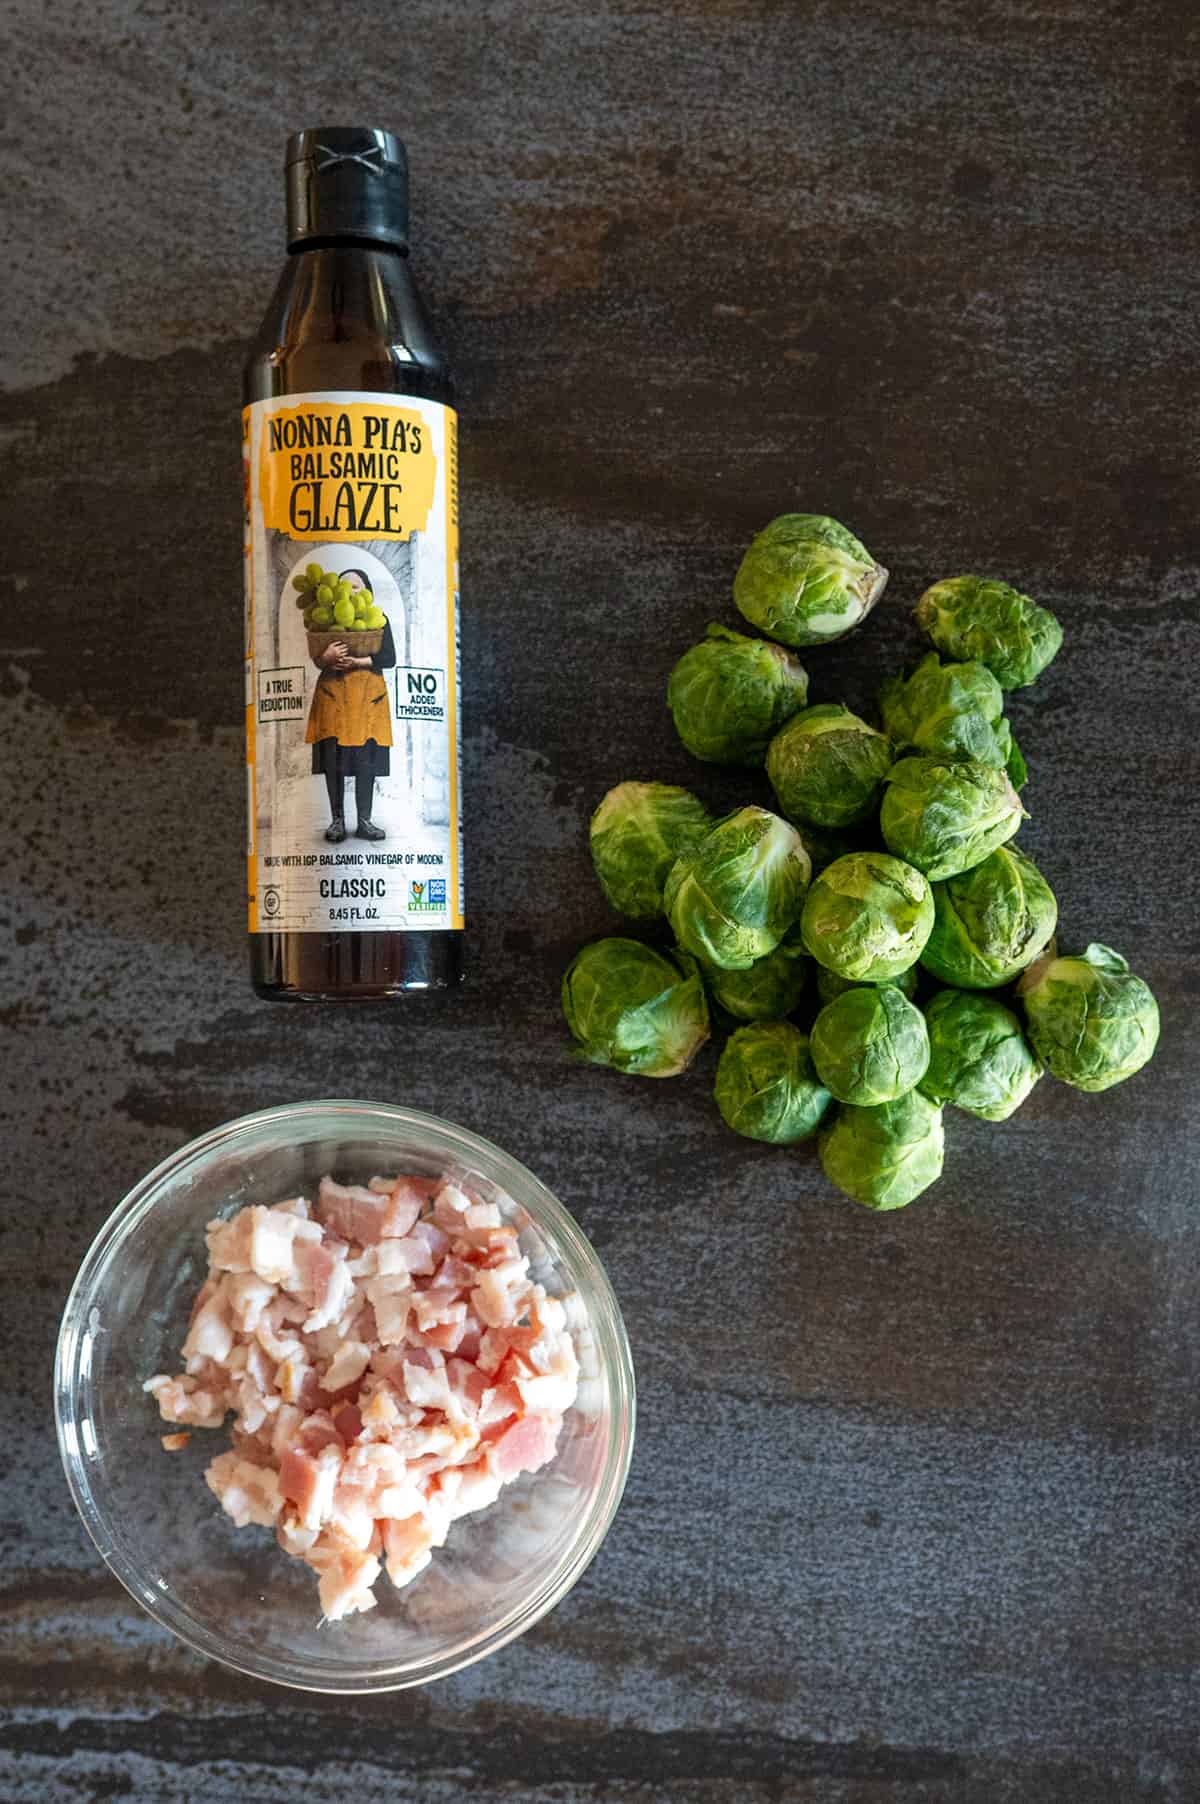 balsamic glaze, chopped bacon and brussels sprouts.